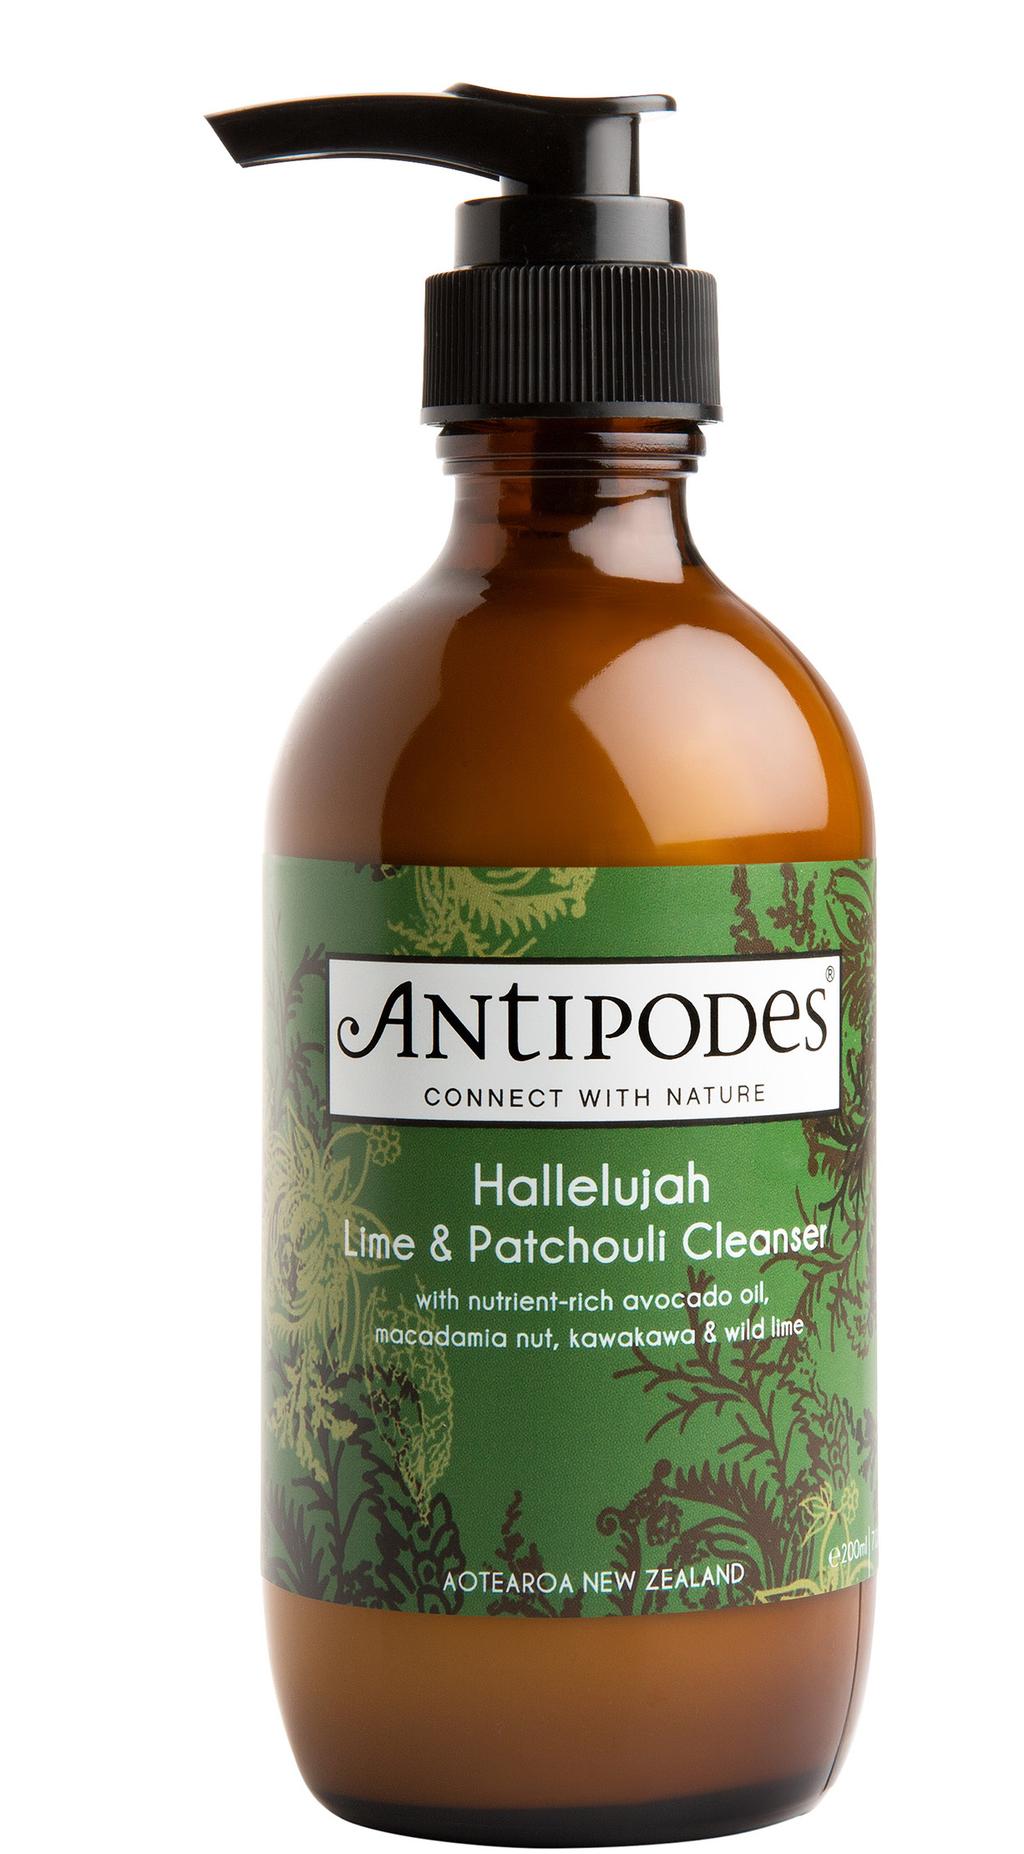 HALLELUJAH LIME & PATCHOULI CLEANSER 200ML Clear impurities while revitalising your skin s surface. Avocado oil gently removes makeup and impurities.